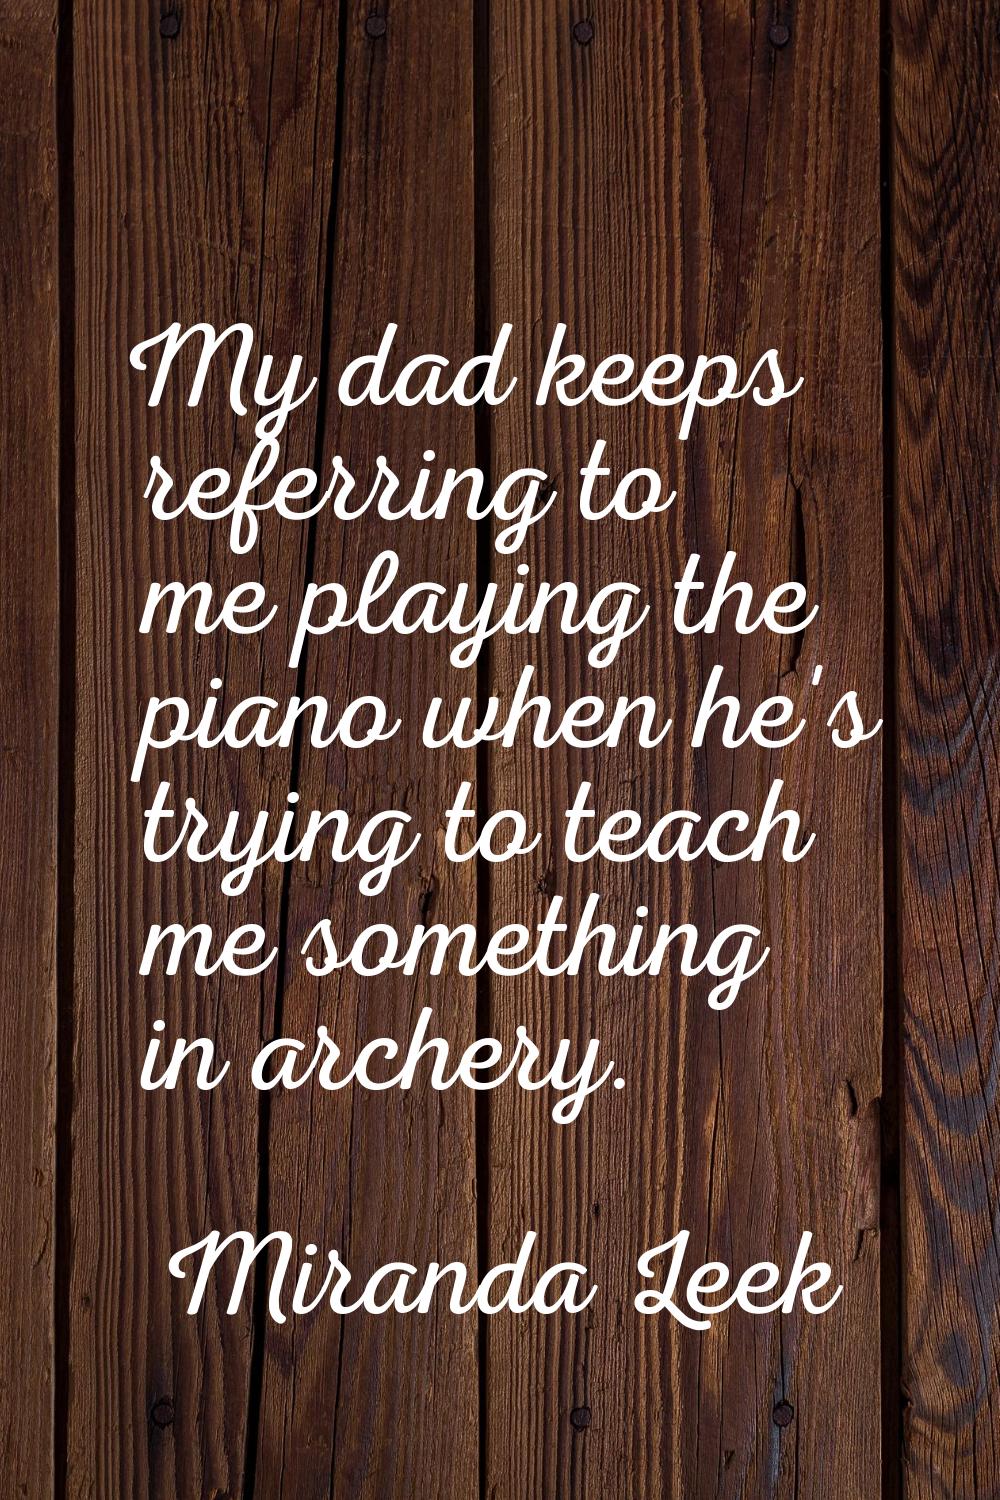 My dad keeps referring to me playing the piano when he's trying to teach me something in archery.